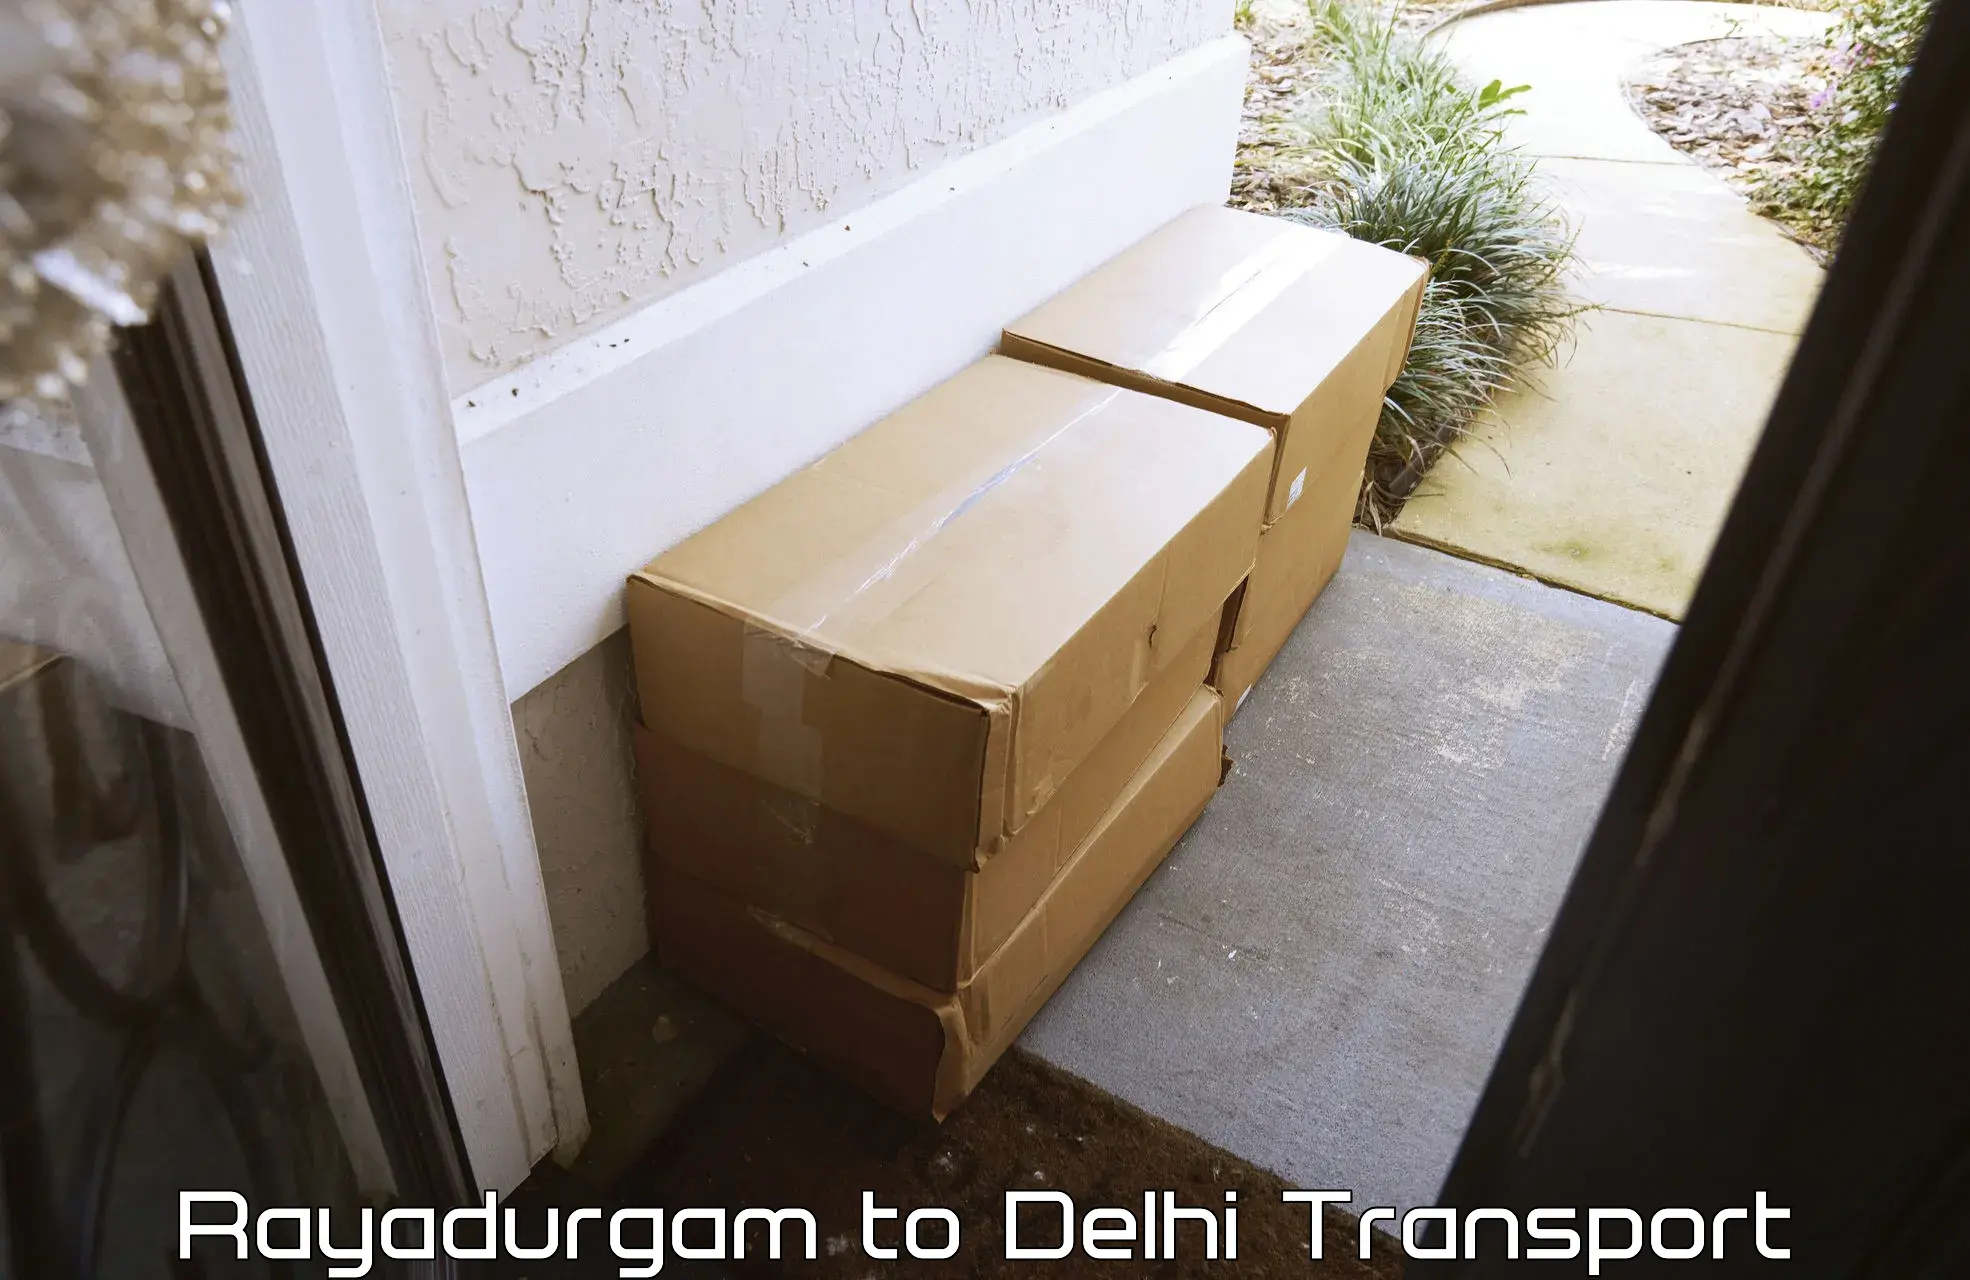 Goods delivery service in Rayadurgam to Ashok Vihar